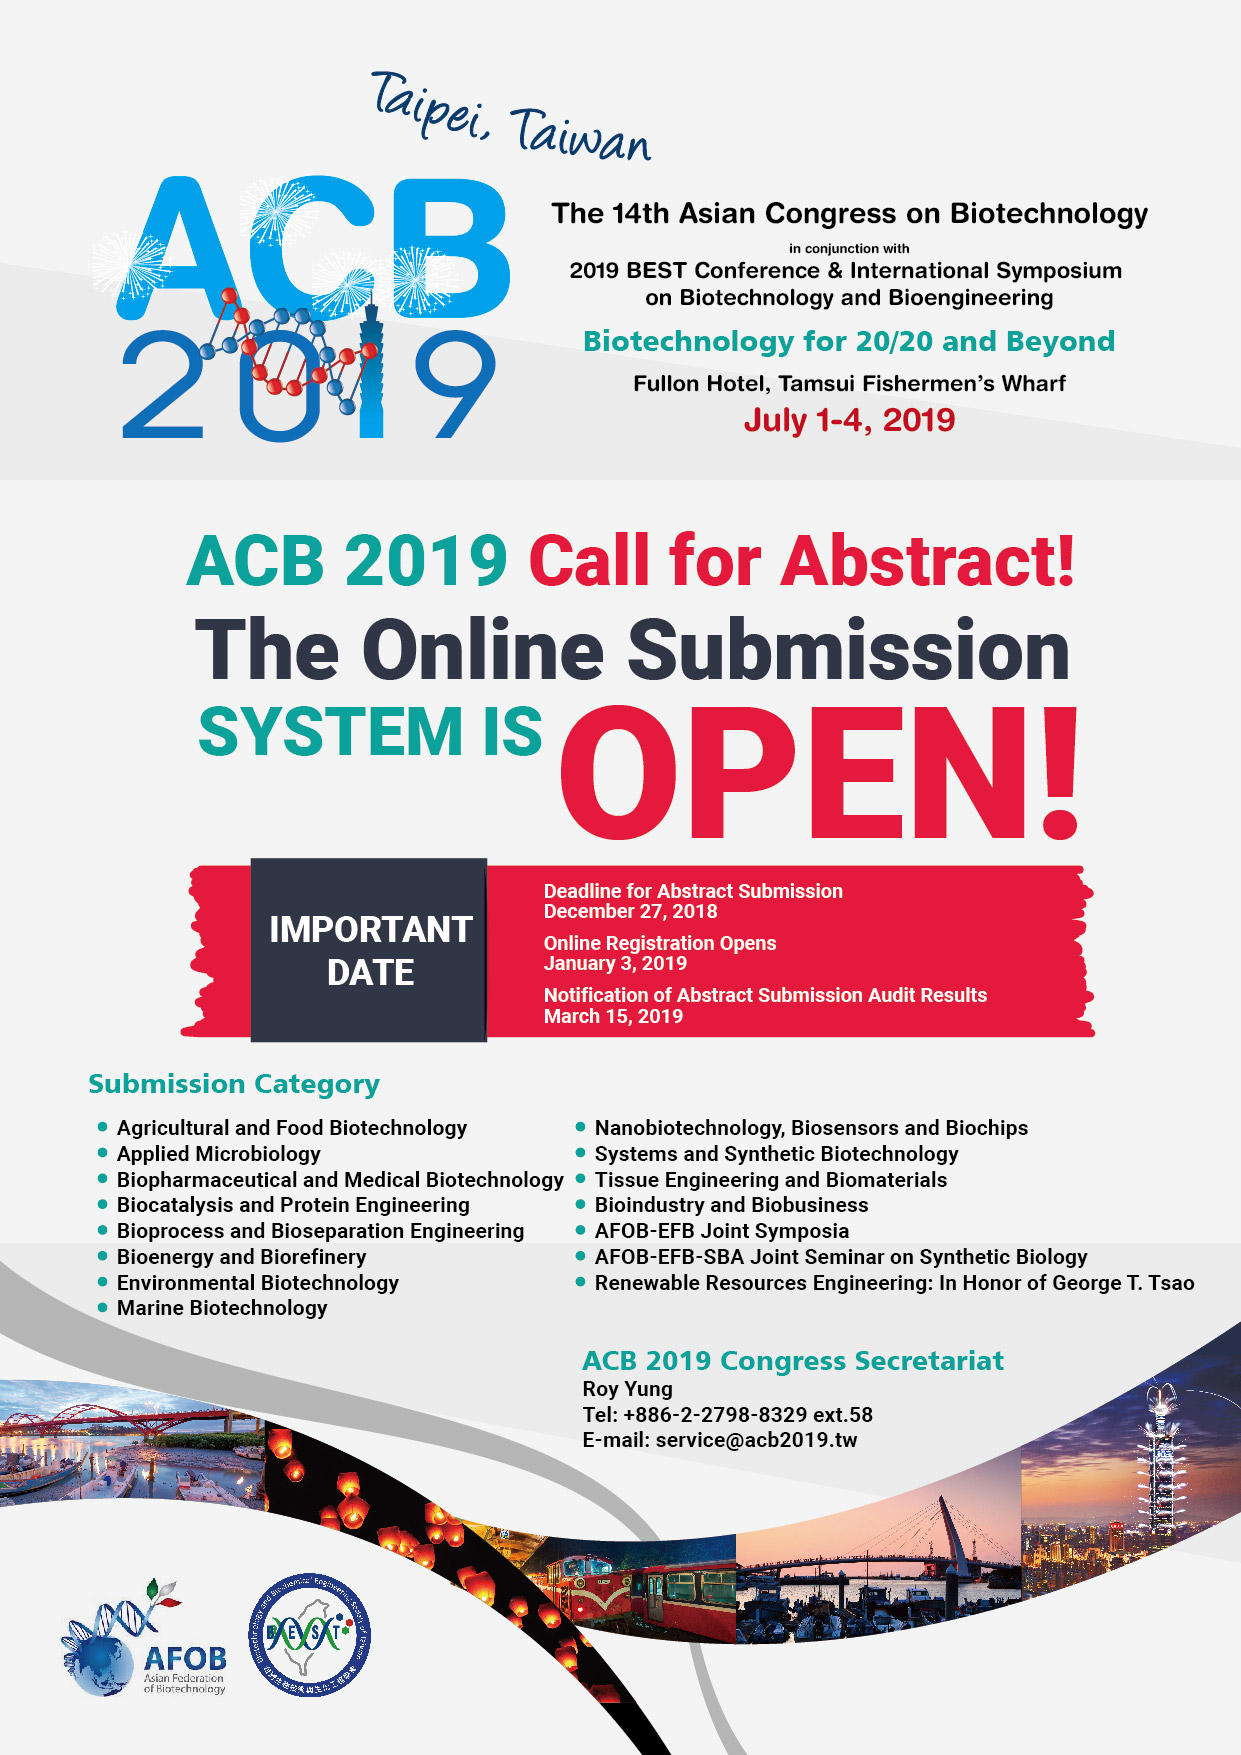 ACB_2019_Submission_System_Open_EDM.jpg